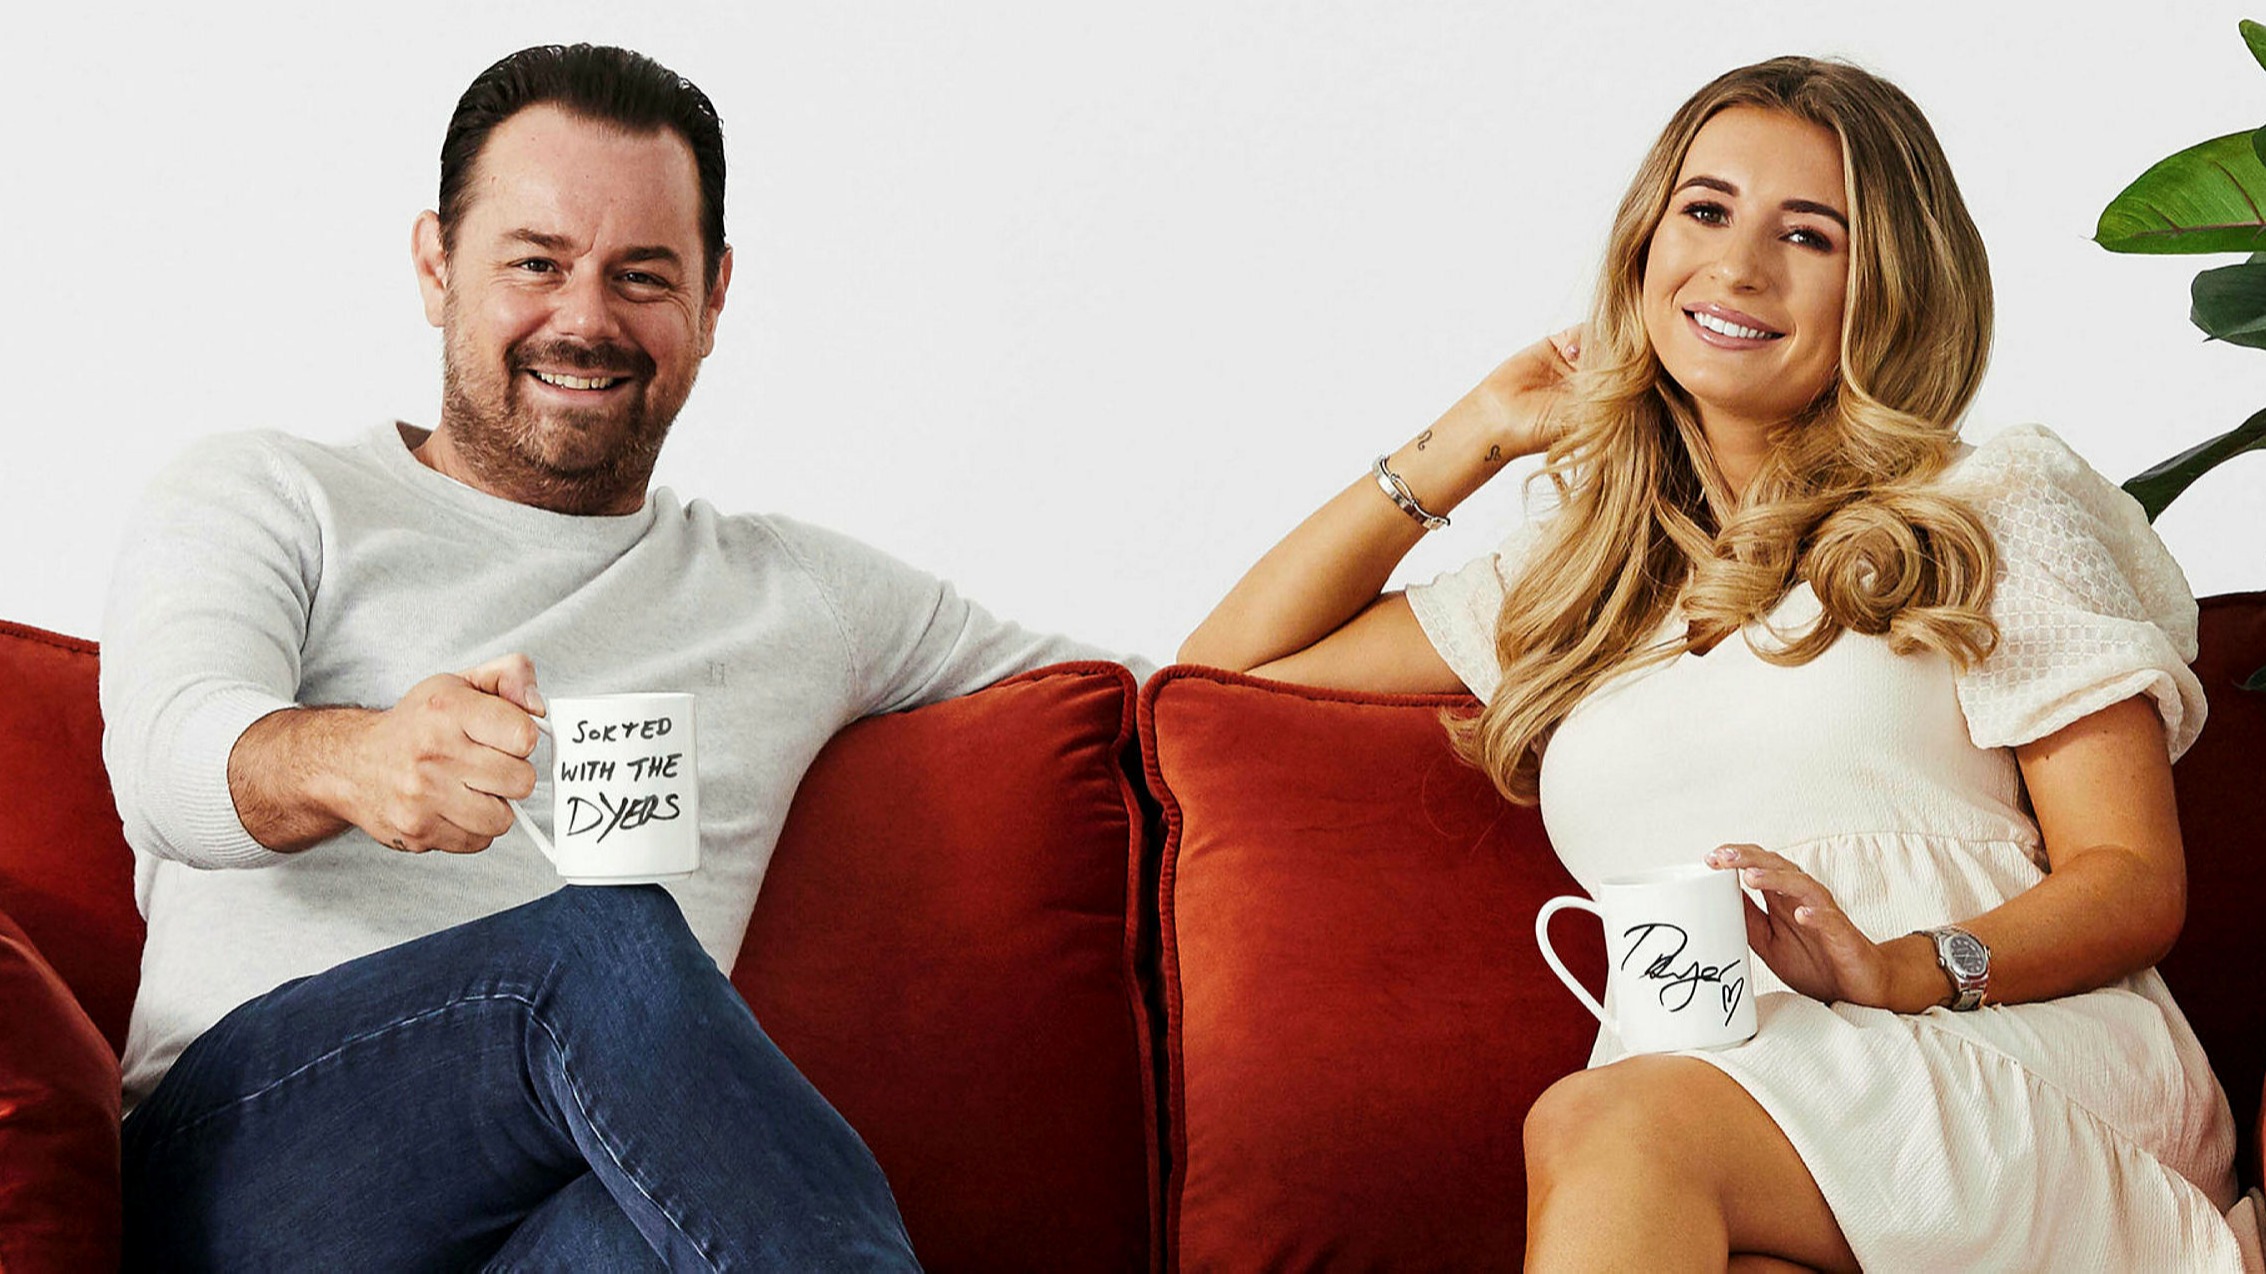 Sorted with the Dyers — podcasters Danny and Dani dish out advice | Financial Times